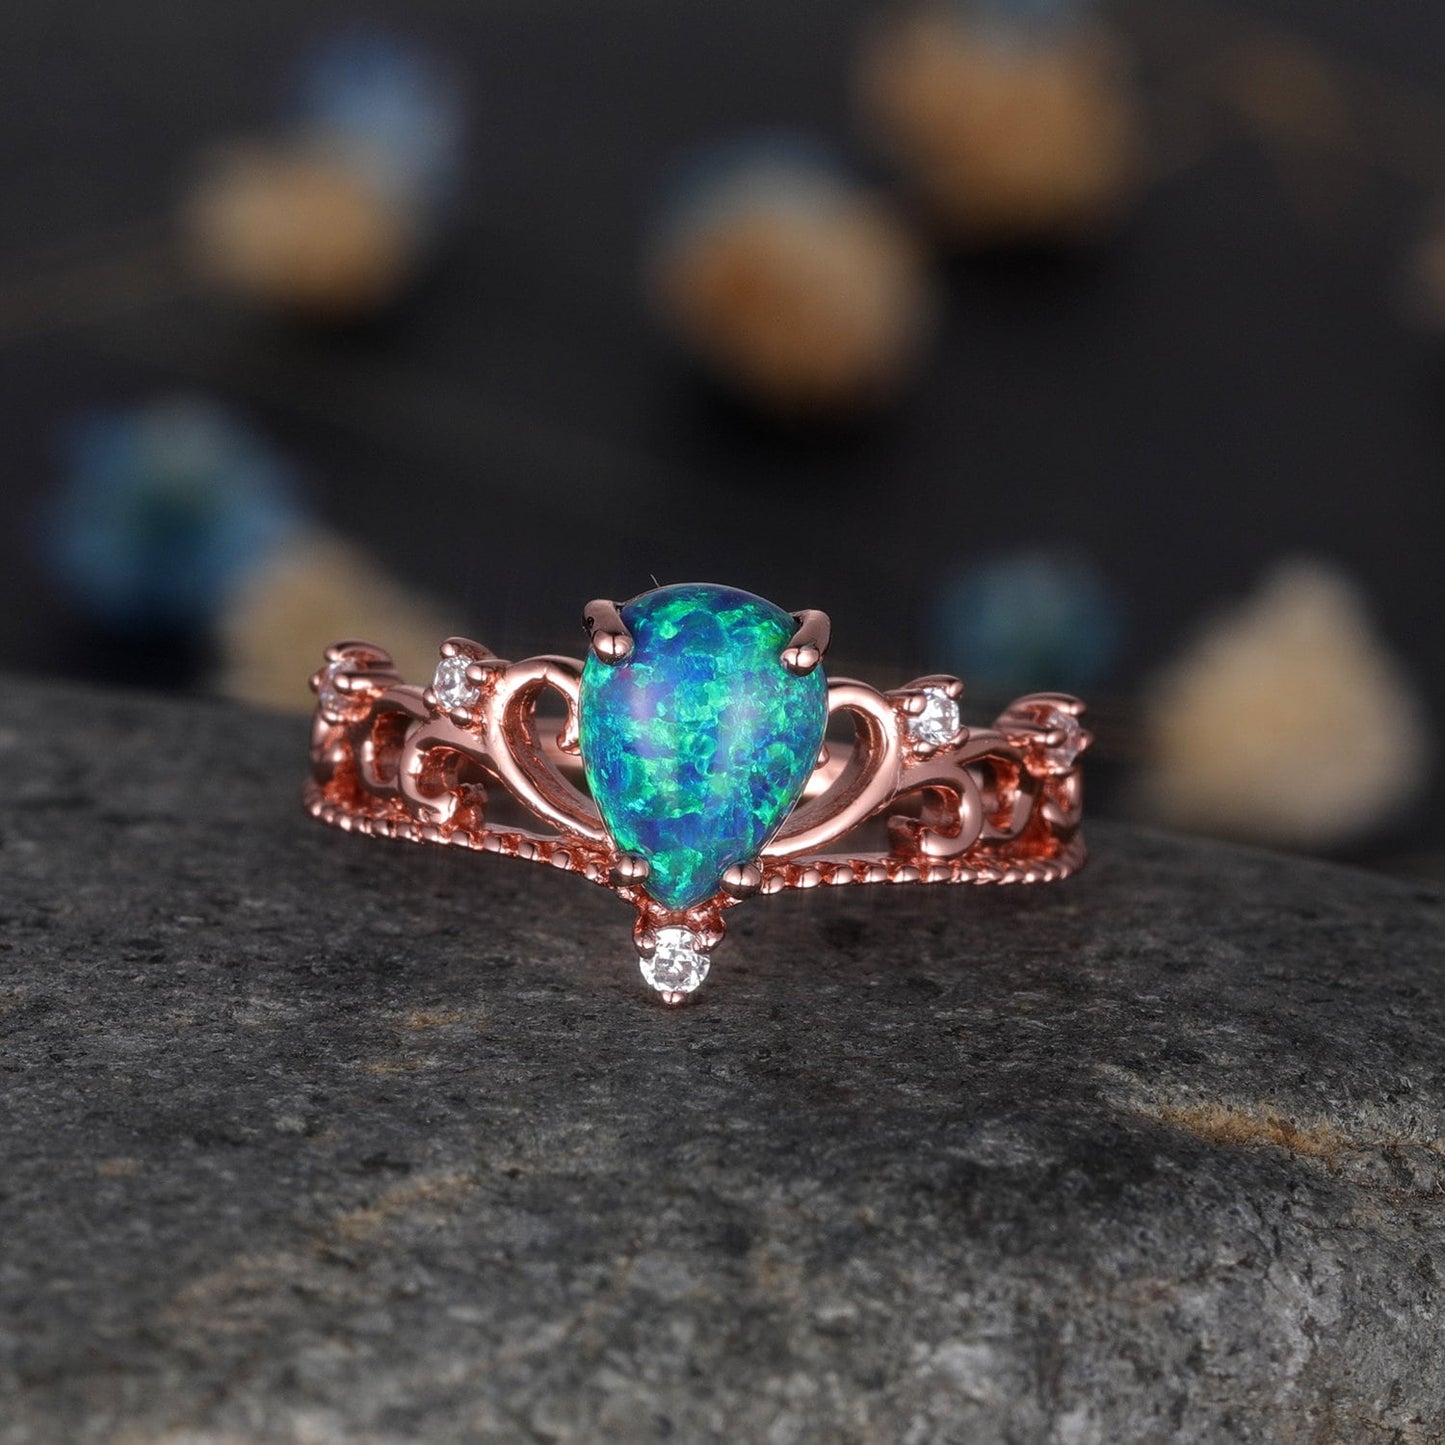 Black Opal Wedding Ring Rose Gold Diamond Engagement Ring Milgrain Floral Band For Women Promise Solitaire Ring 6x8mm Pear Shaped Opal